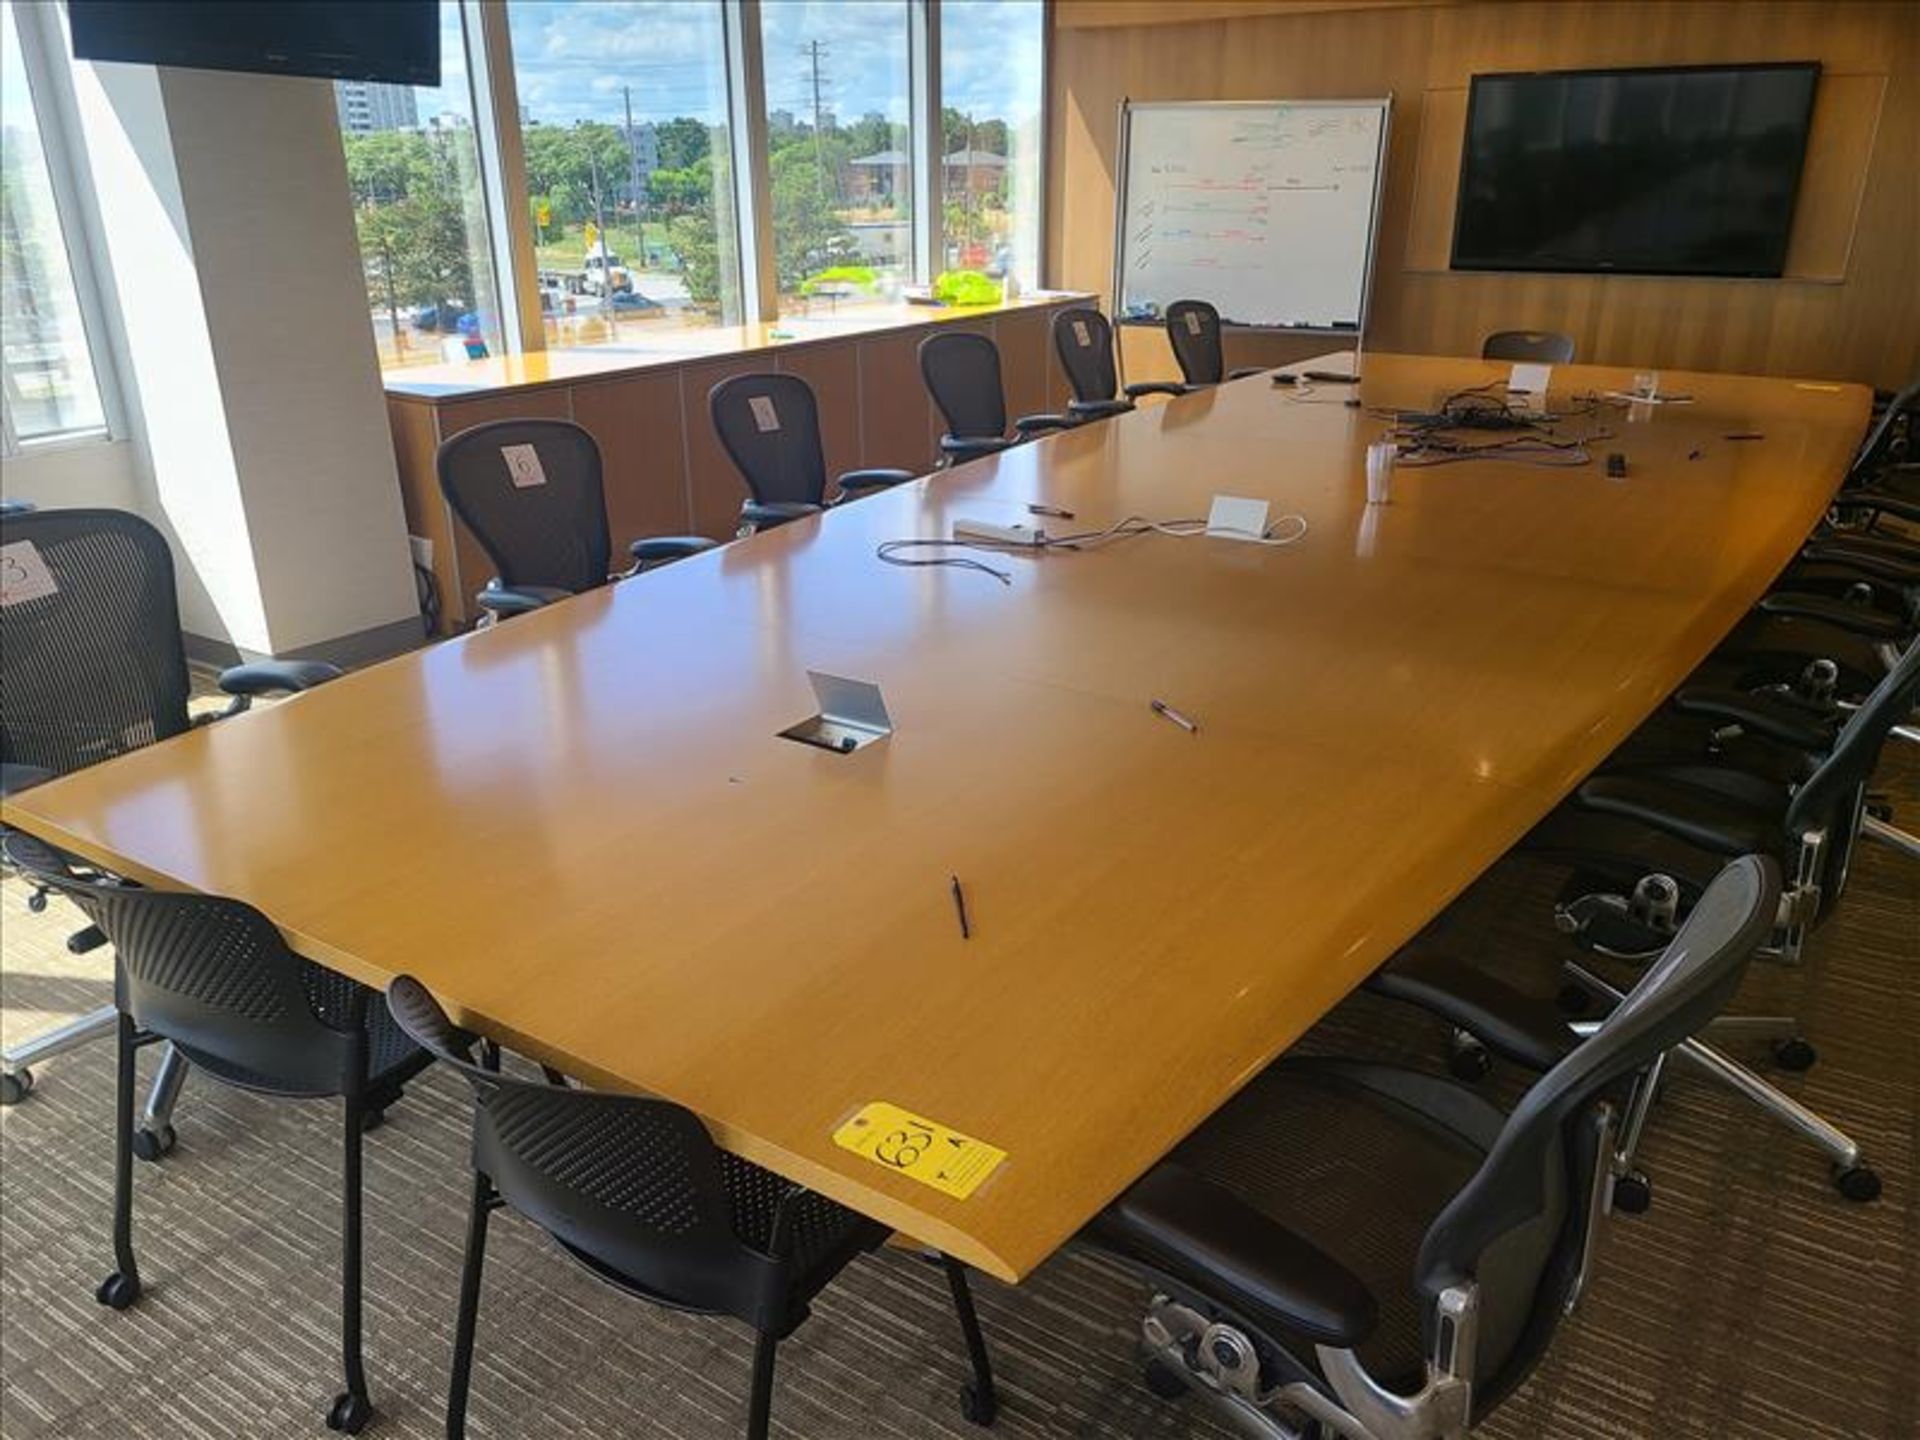 Boardroom Meeting Table approx. 22 ft. x 8 ft., (Qty 1) (Floor 3) (Boardroom 303)